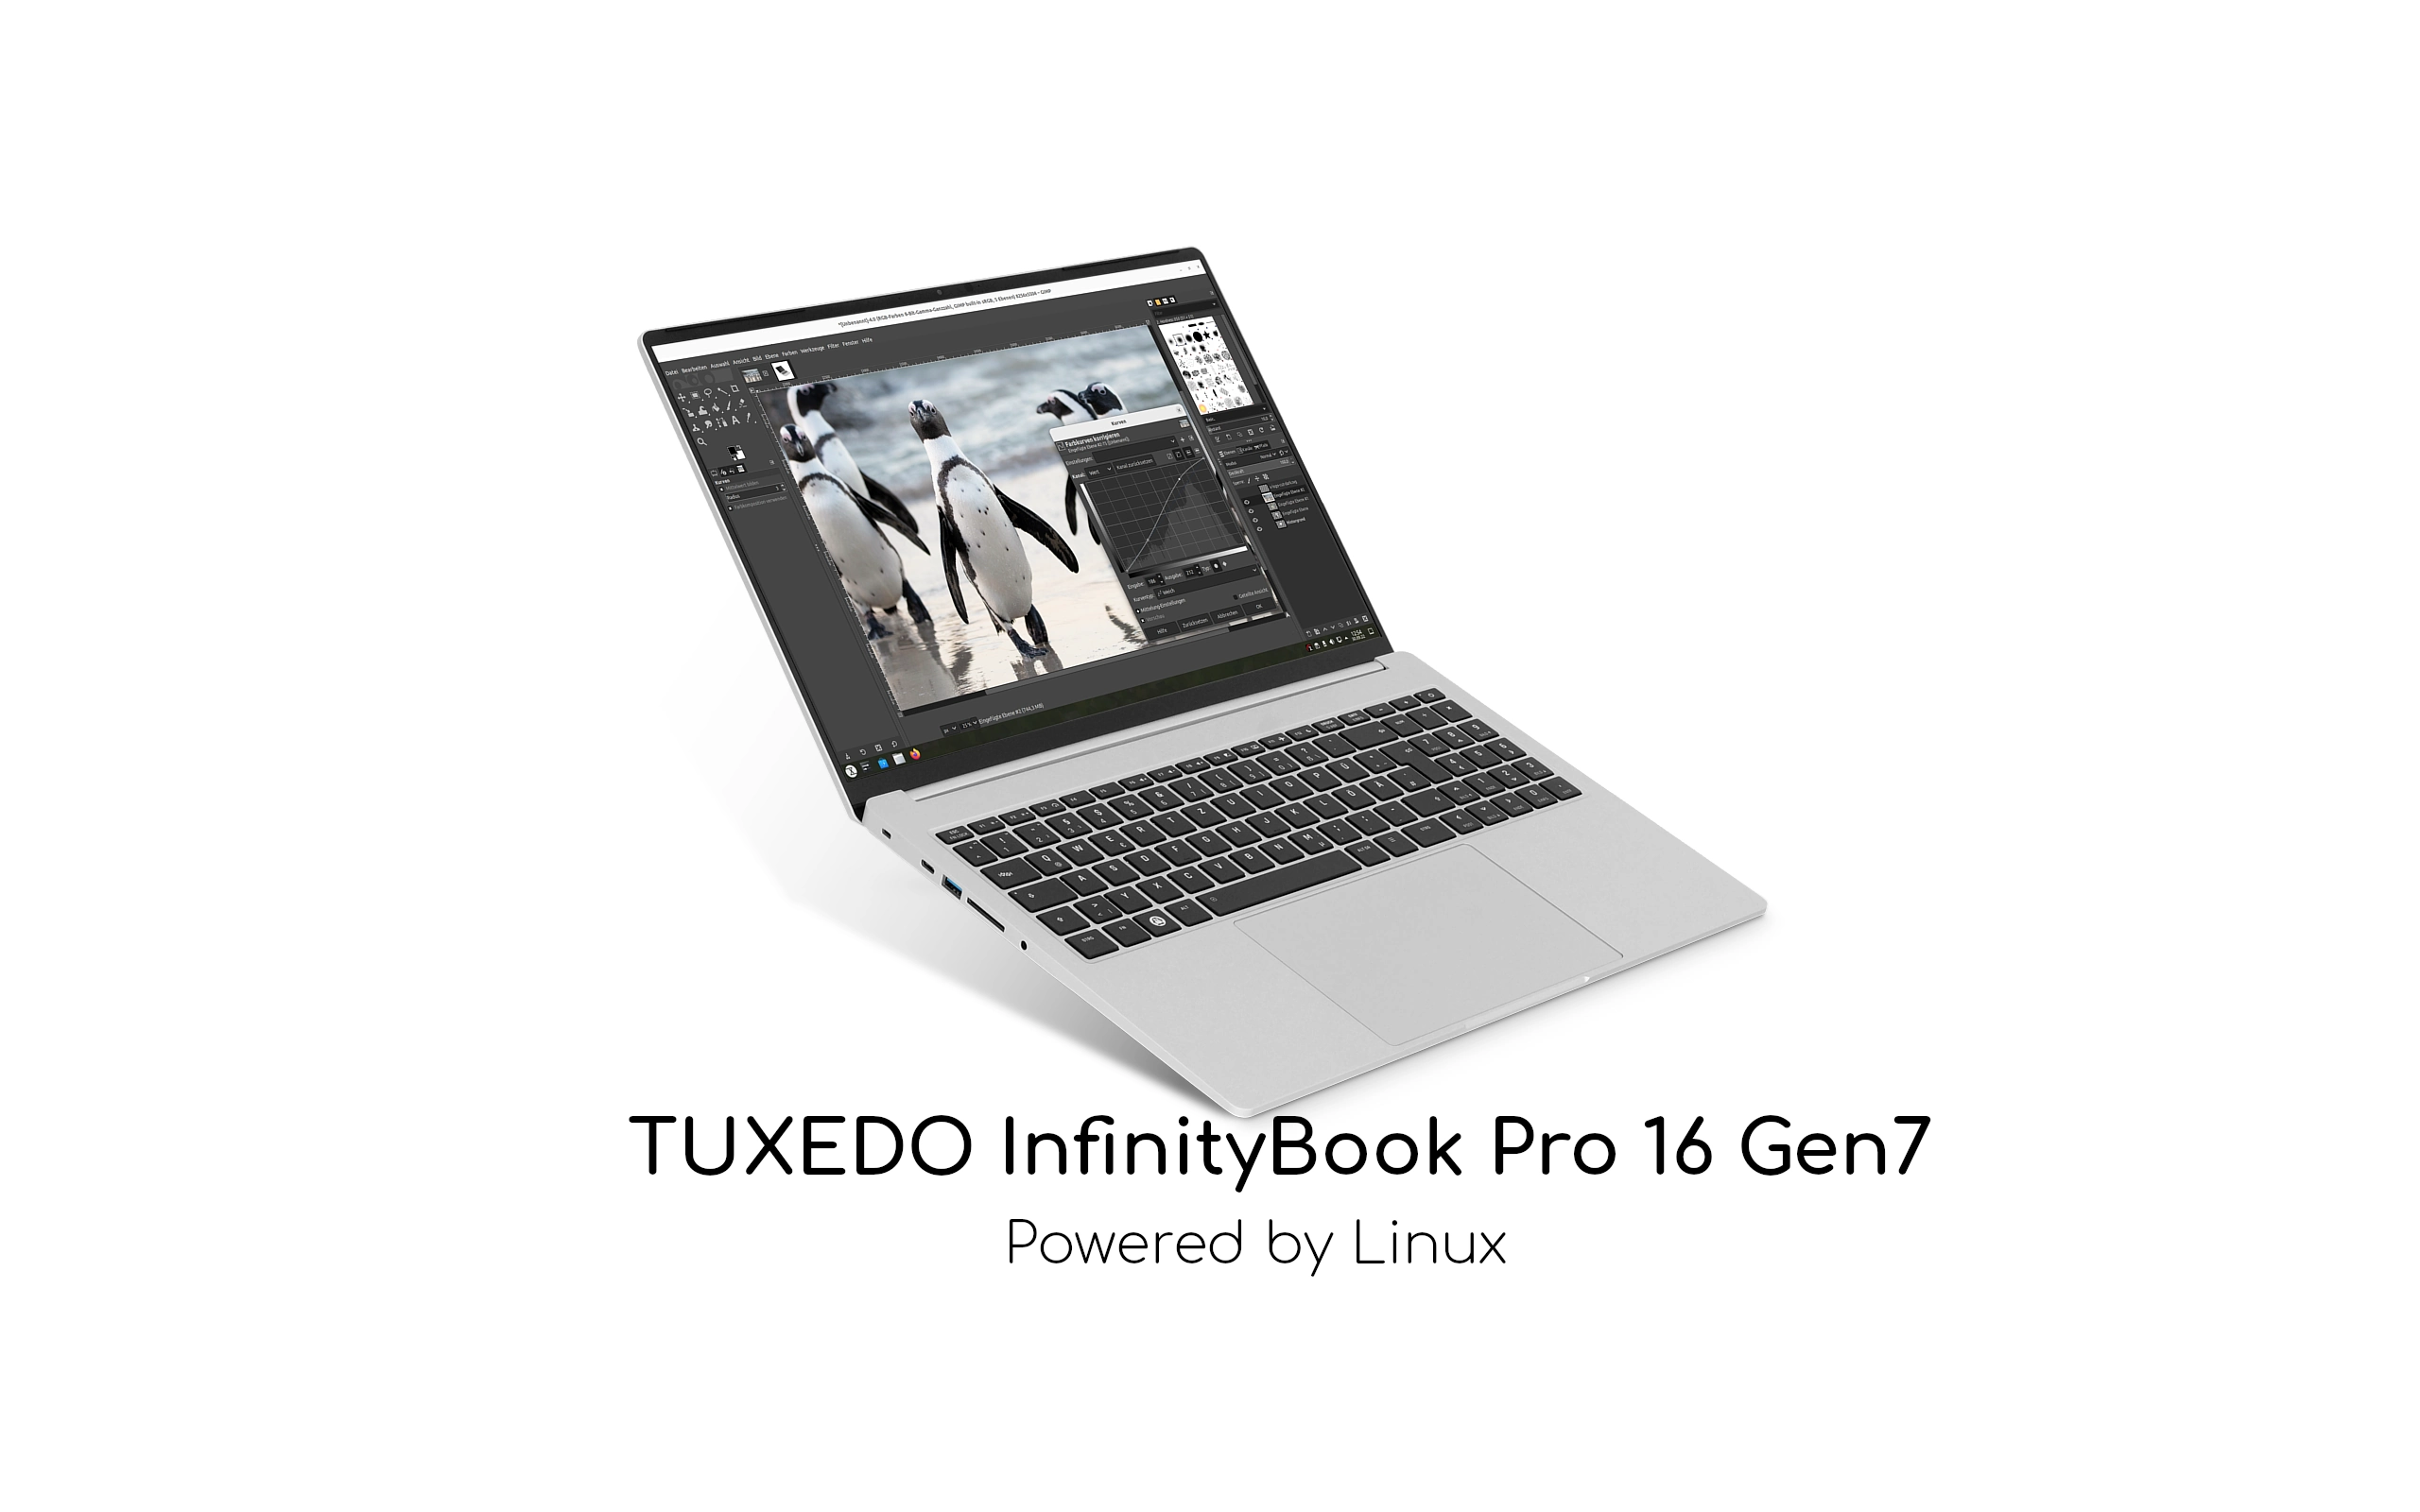 TUXEDO InfinityBook Pro 16 Gen7 Linux Laptop Launches with 240Hz Display, DDR5 RAM